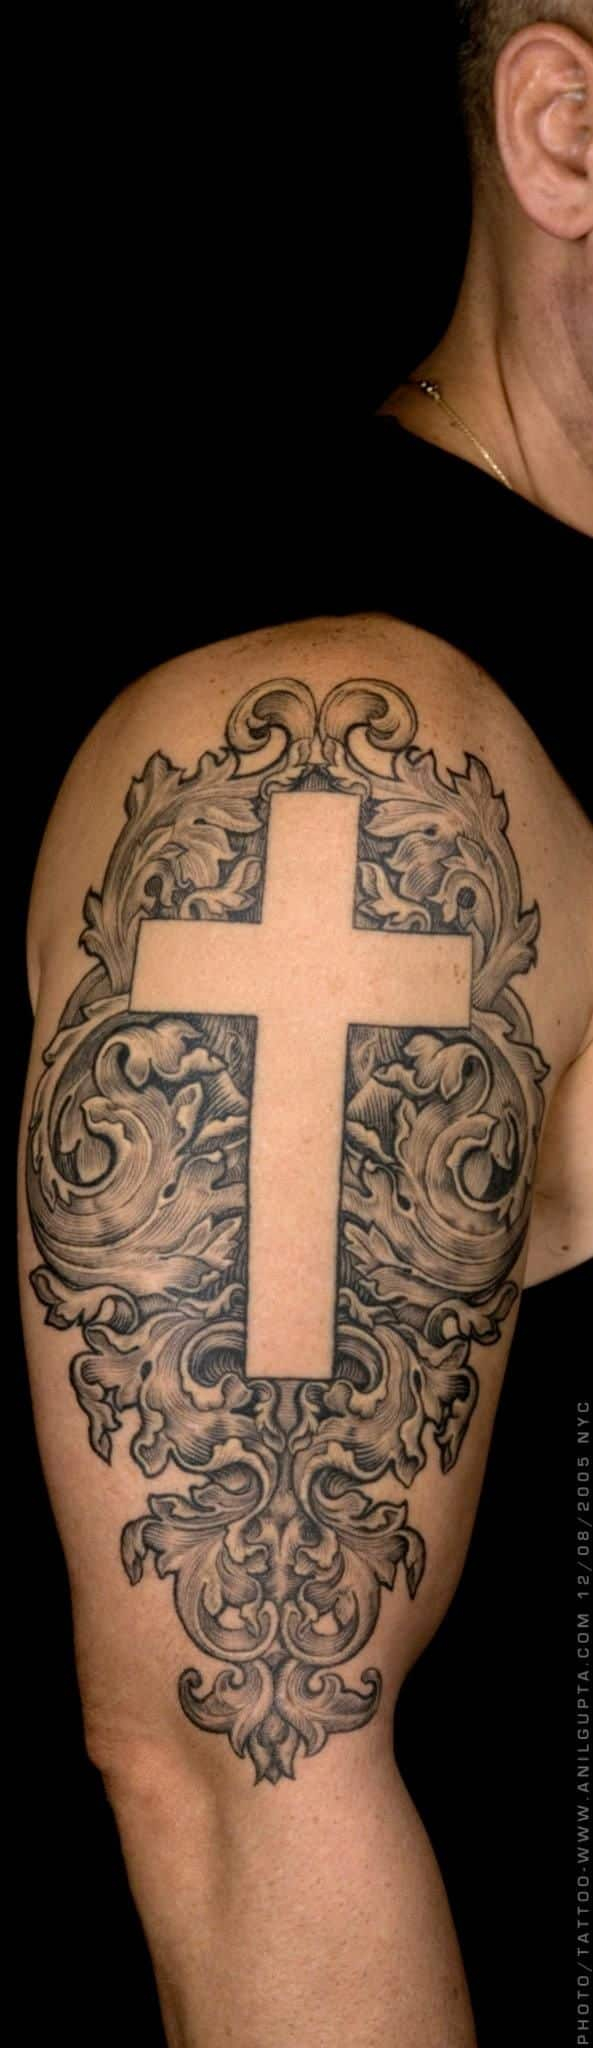 Cross Tattoos For Guys Tattoo Ideas And Designs For Men in size 593 X 2048